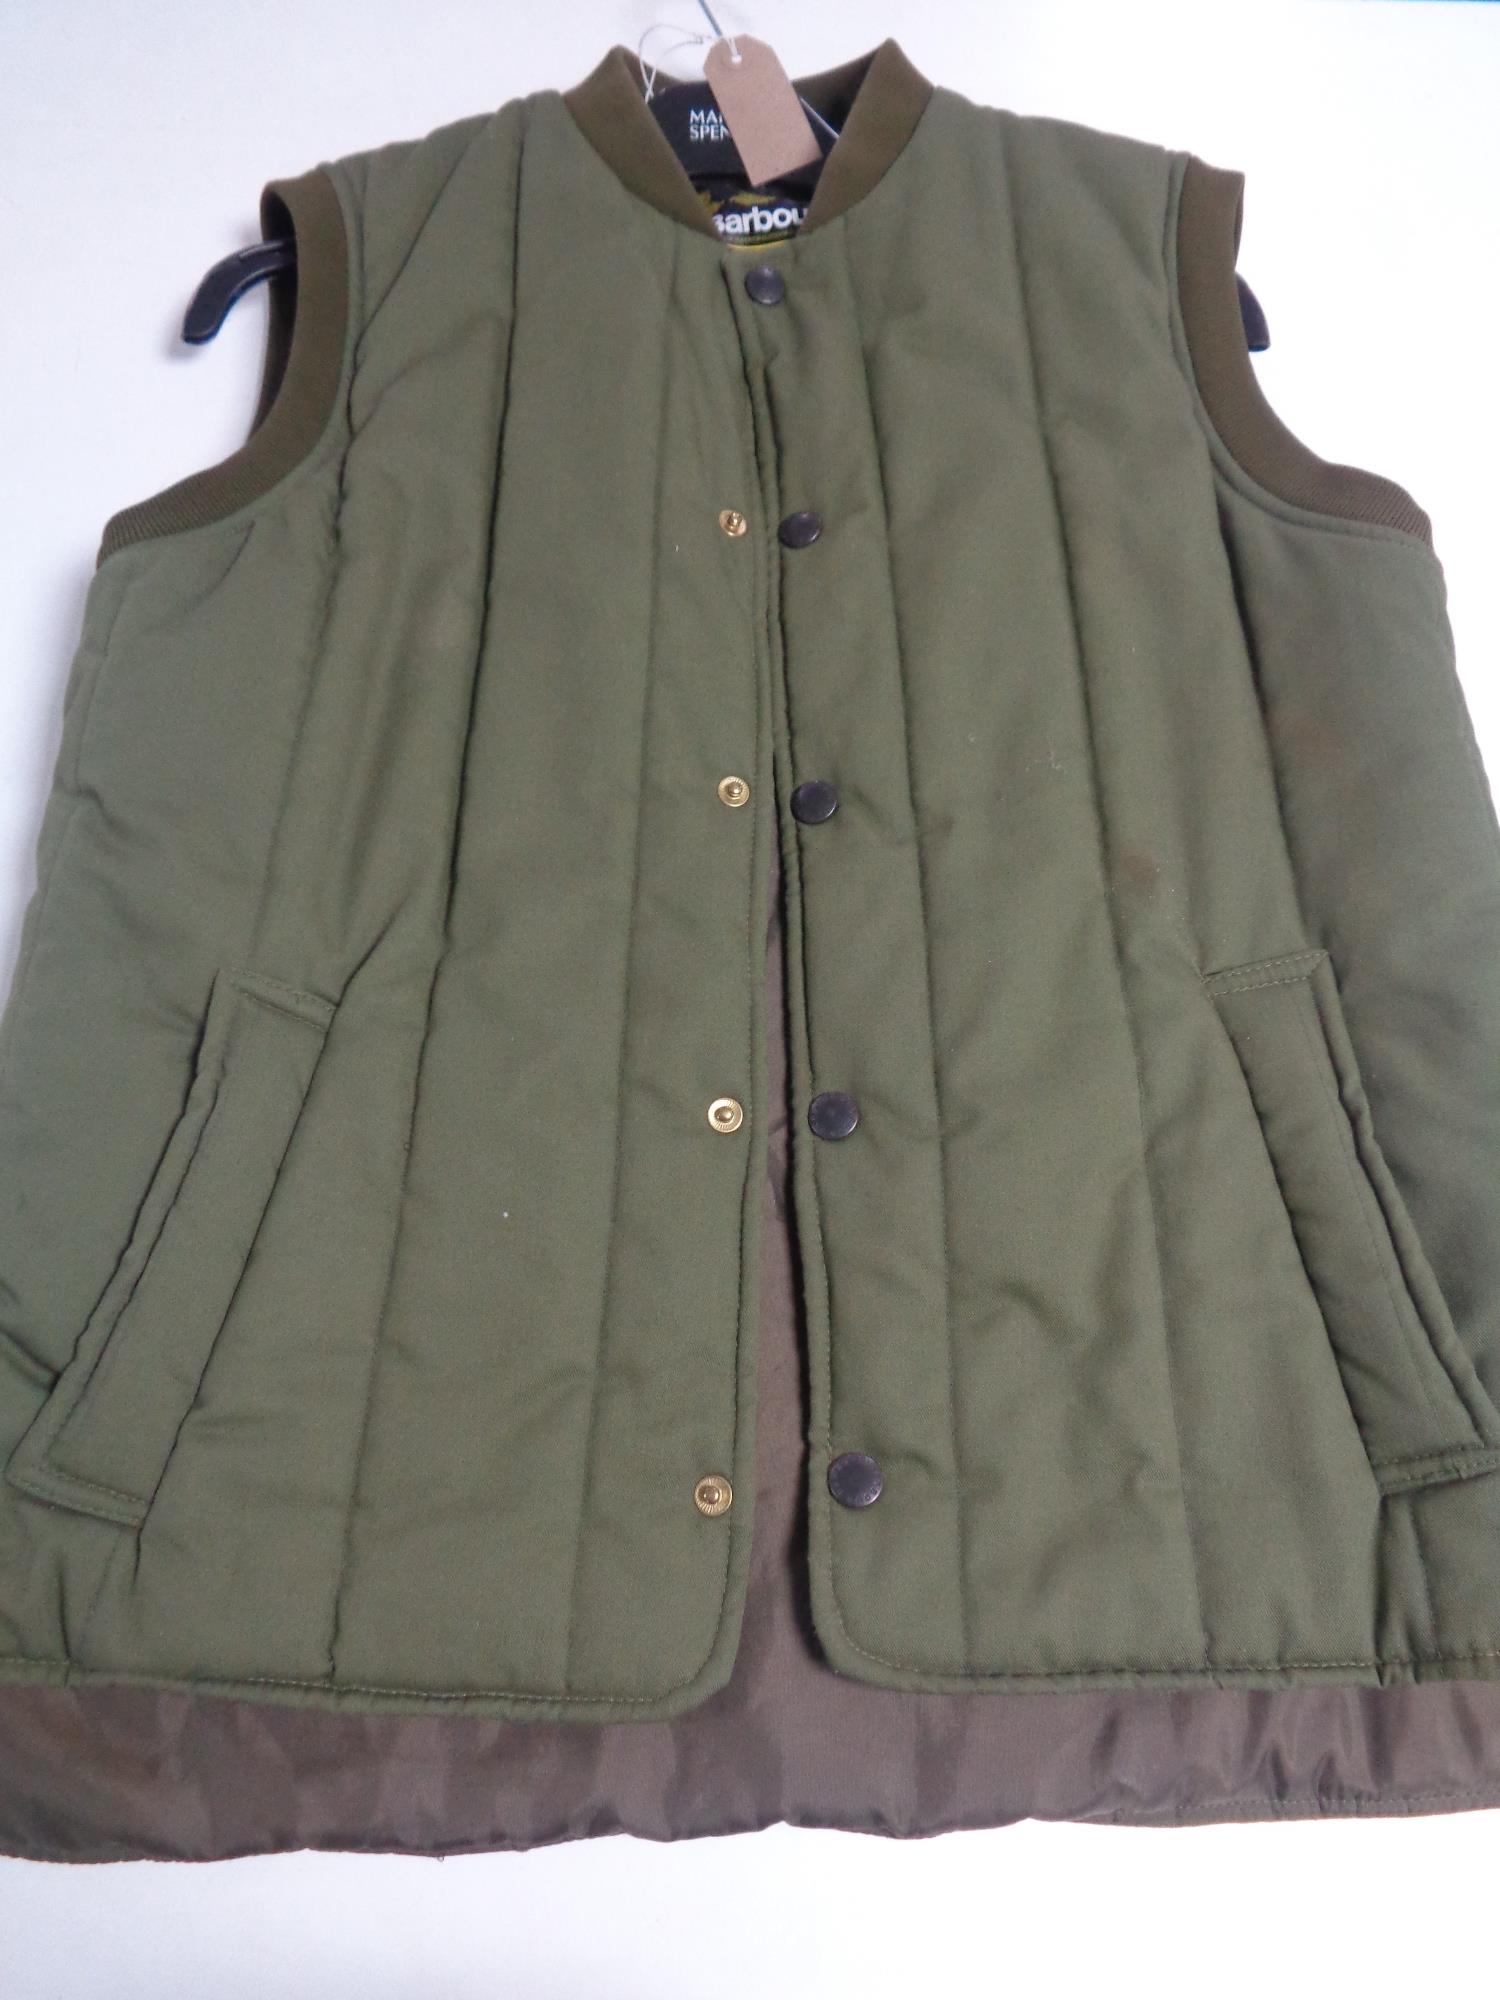 A Barbour body warmer,